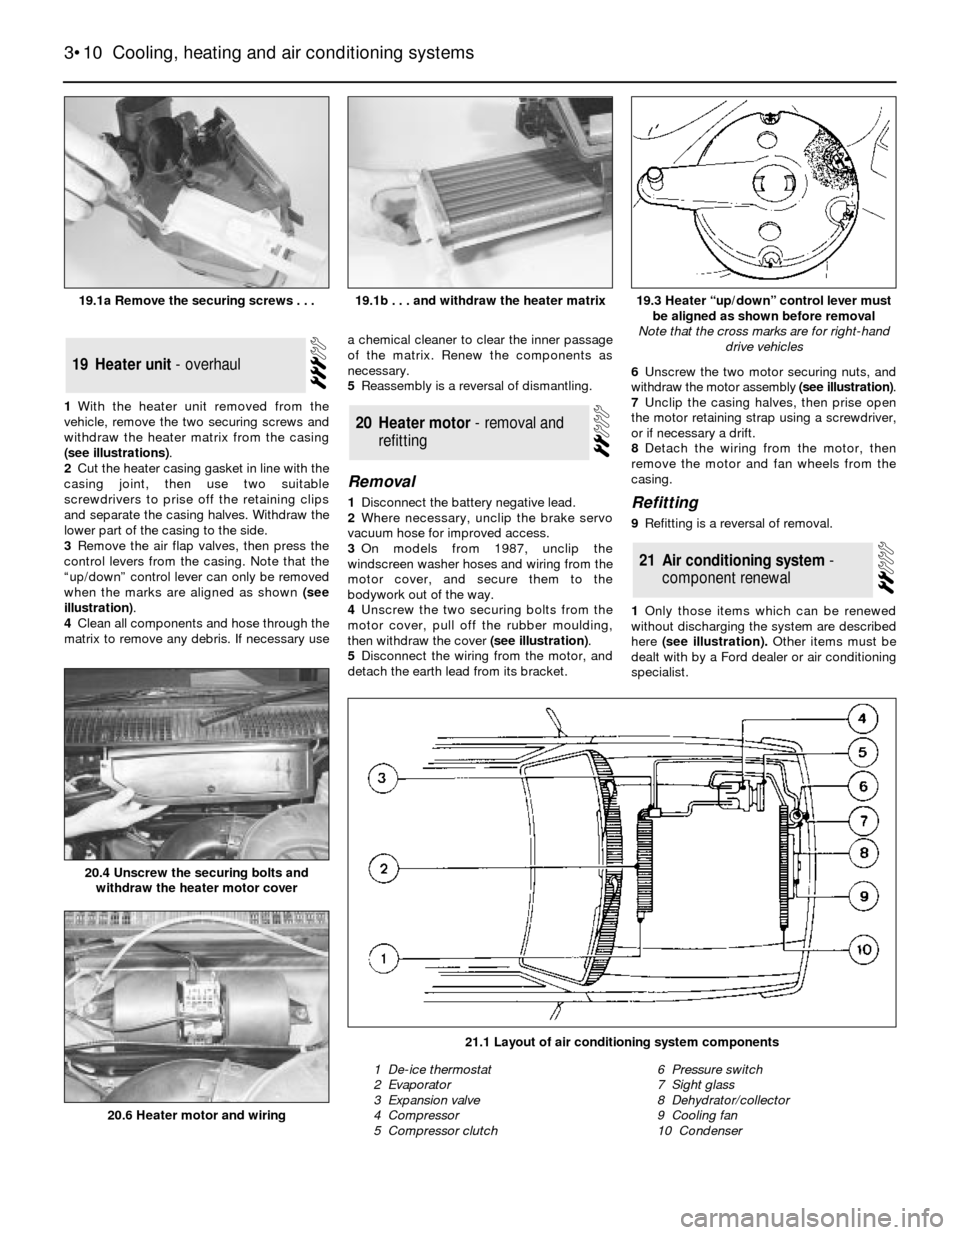 FORD SIERRA 1993 2.G Cooling And Air Conditioning Systems Workshop Manual 1With the heater unit removed from the
vehicle, remove the two securing screws and
withdraw the heater matrix from the casing
(see illustrations).
2Cut the heater casing gasket in line with the
casing